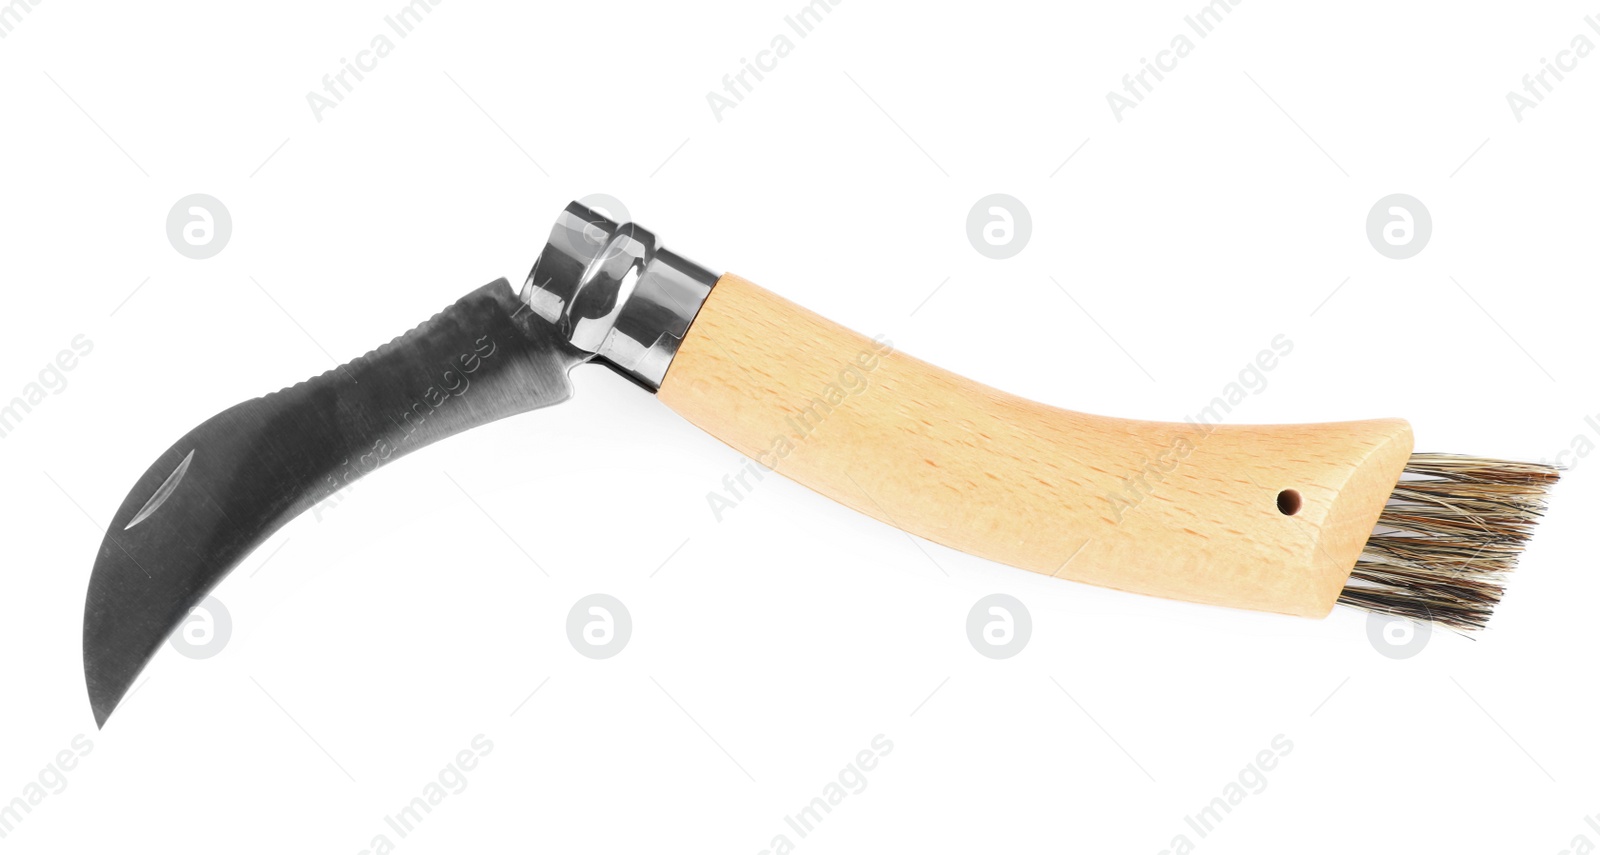 Photo of Mushroom knife with brush isolated on white, top view